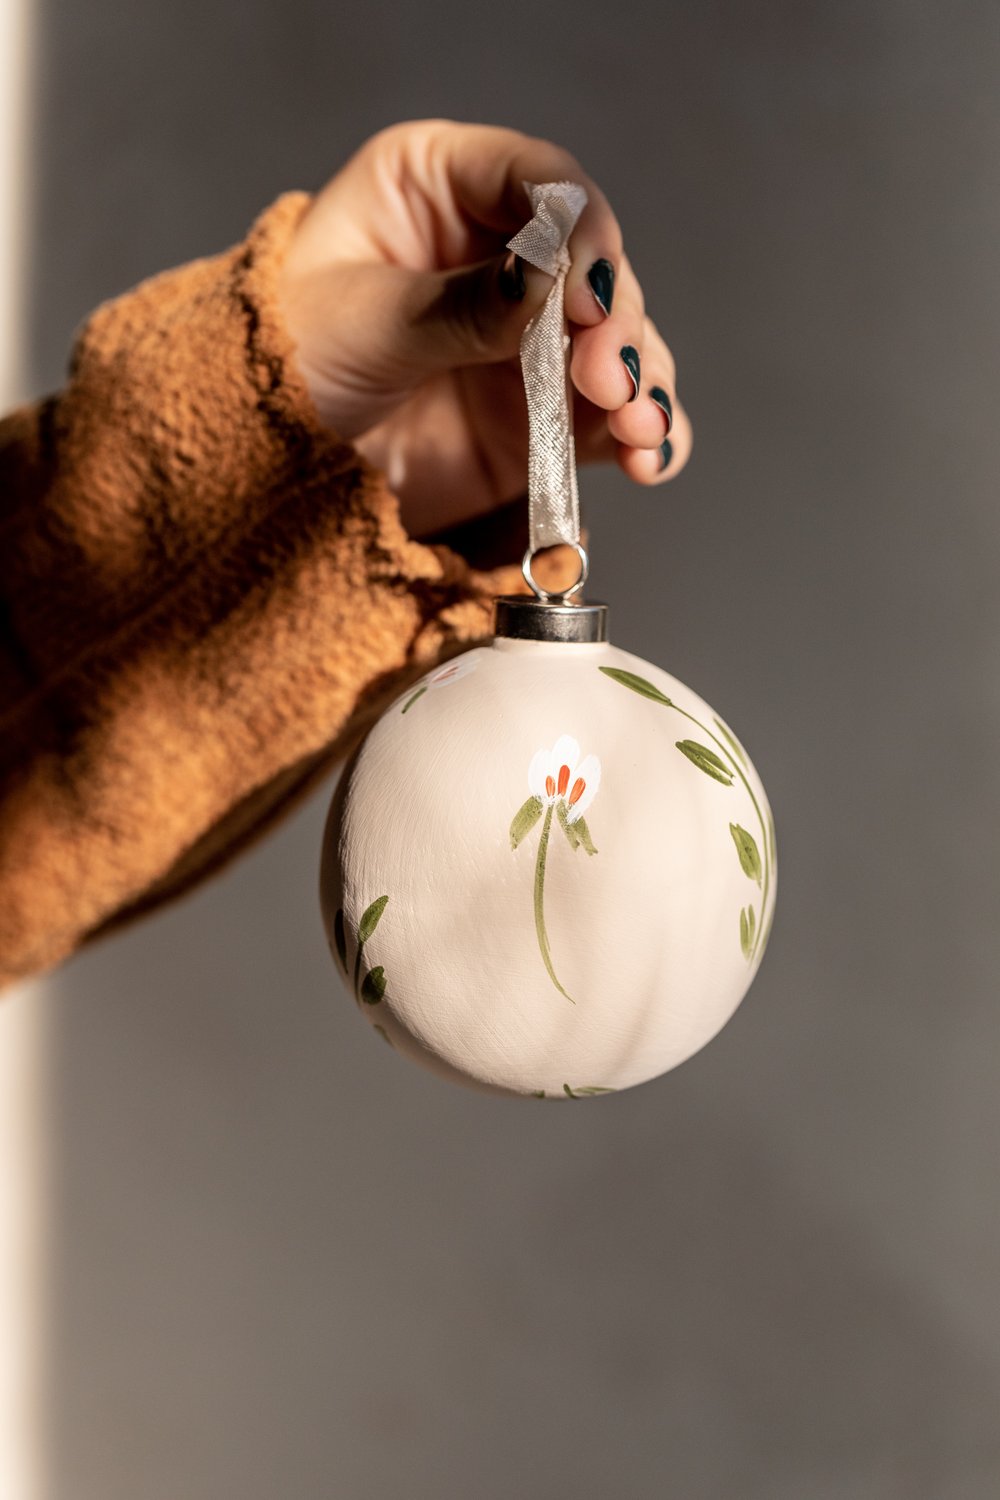 Ornament Painting Class Benefiting SOME — Riley Sheehey